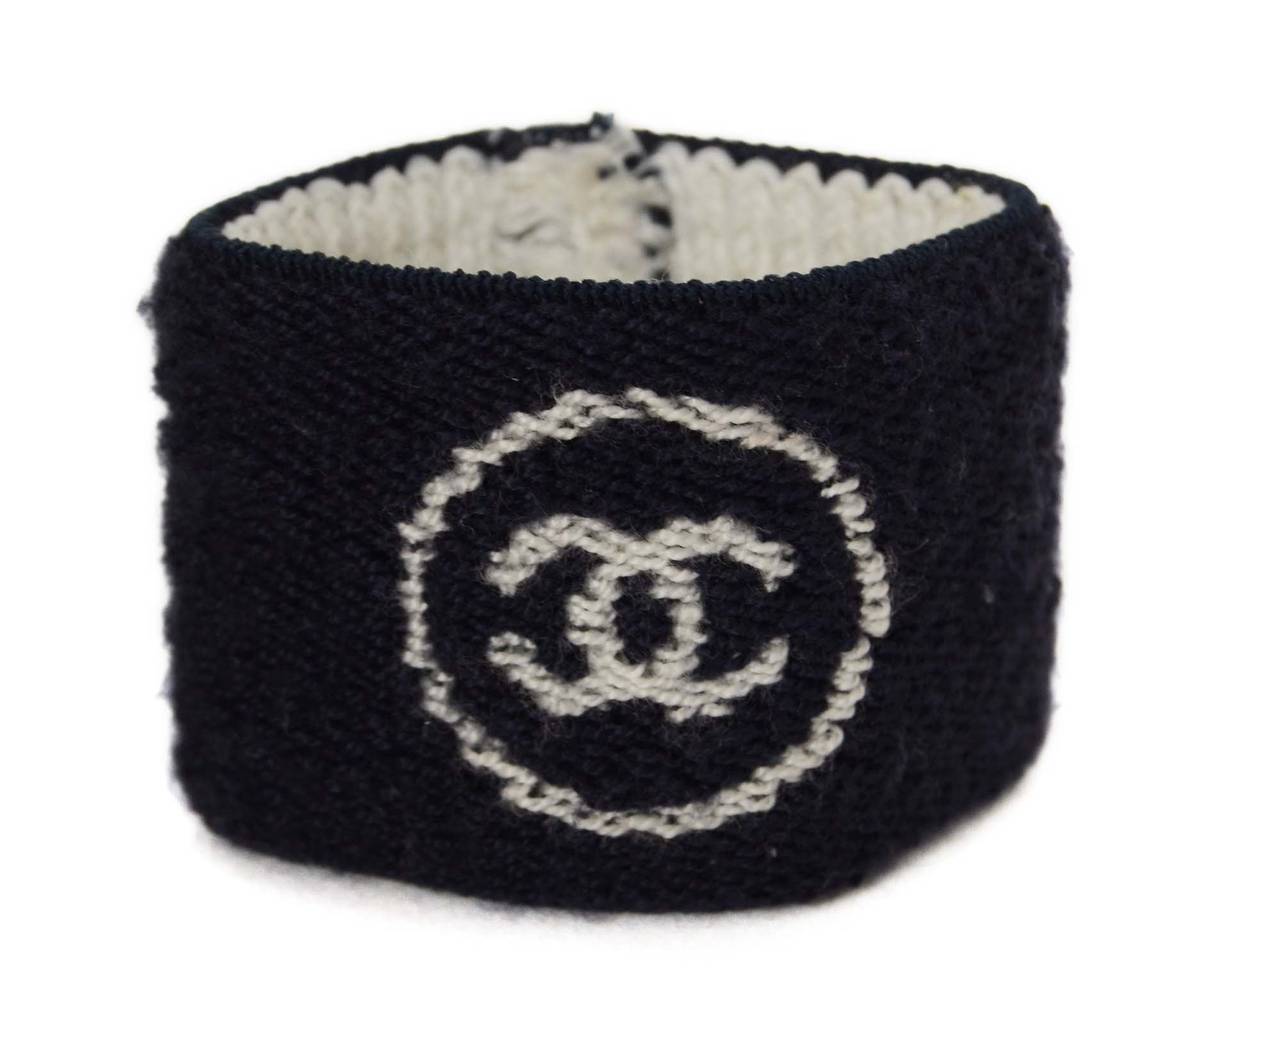 Chanel Vintage Navy & White Set of Three Sweat Bands
Features 